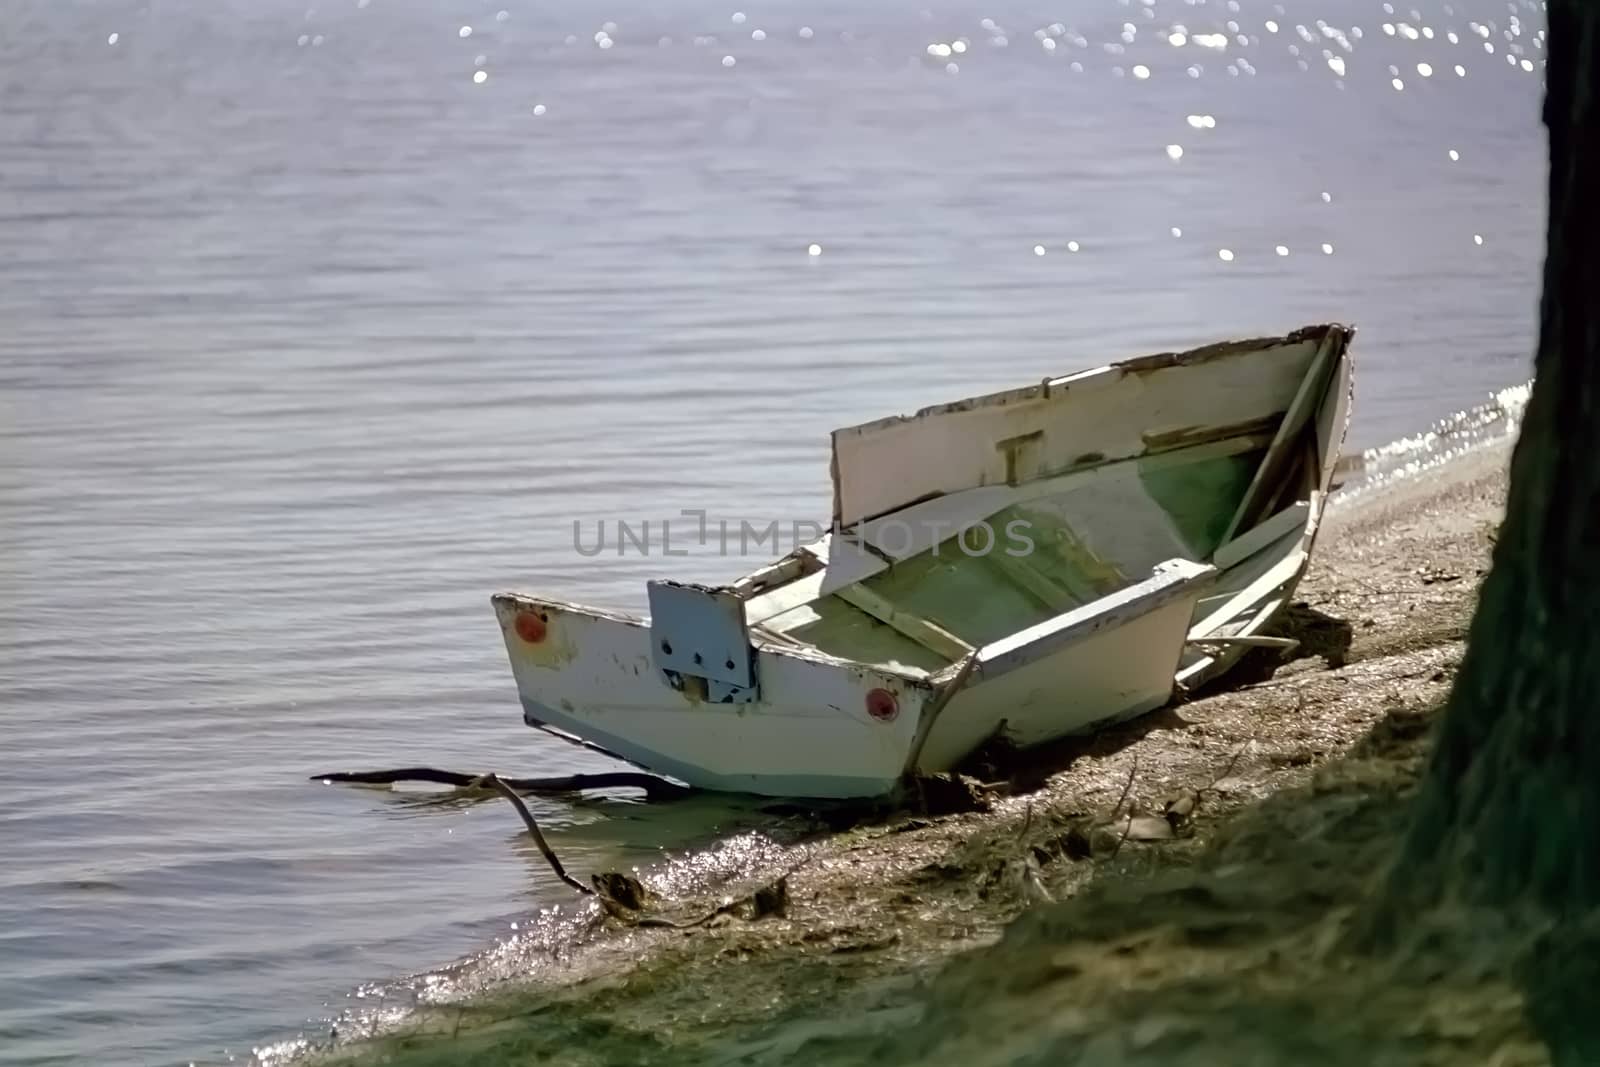 A smashed small boat washed up on the lake shore